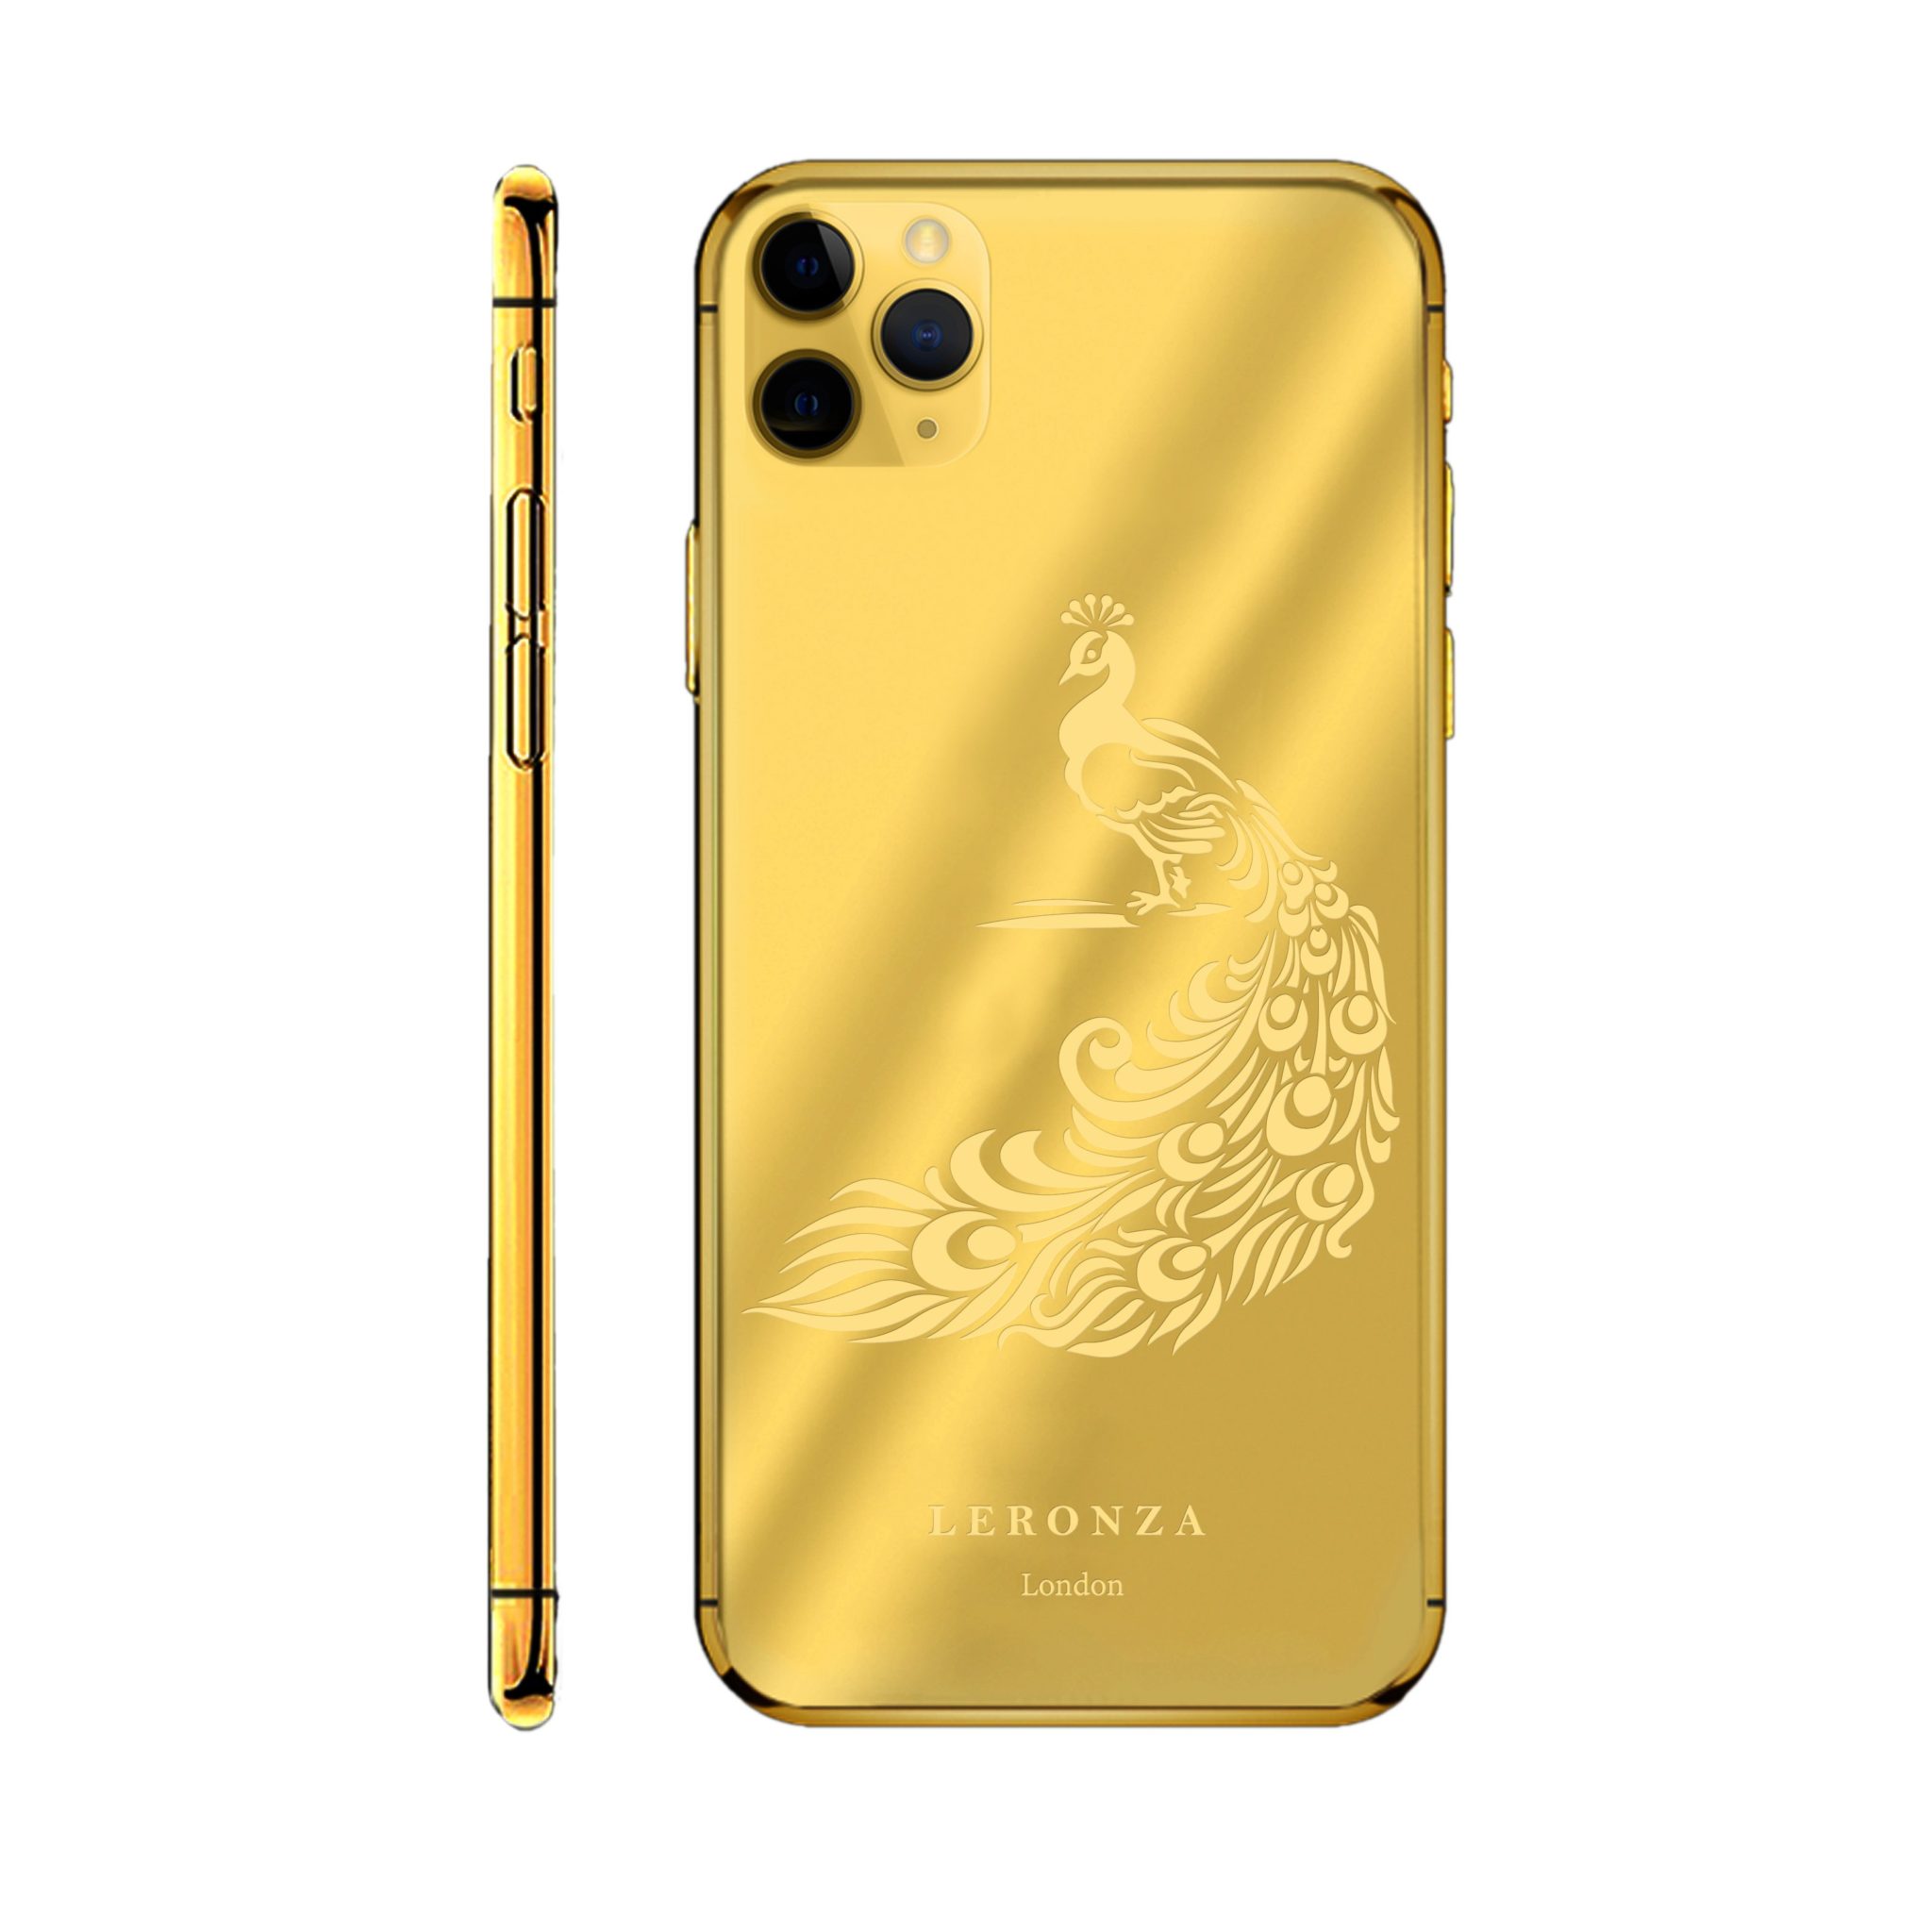 24k Gold Peacock Limited Edition iPhone 11 Pro and 11 Pro Max - Leronza